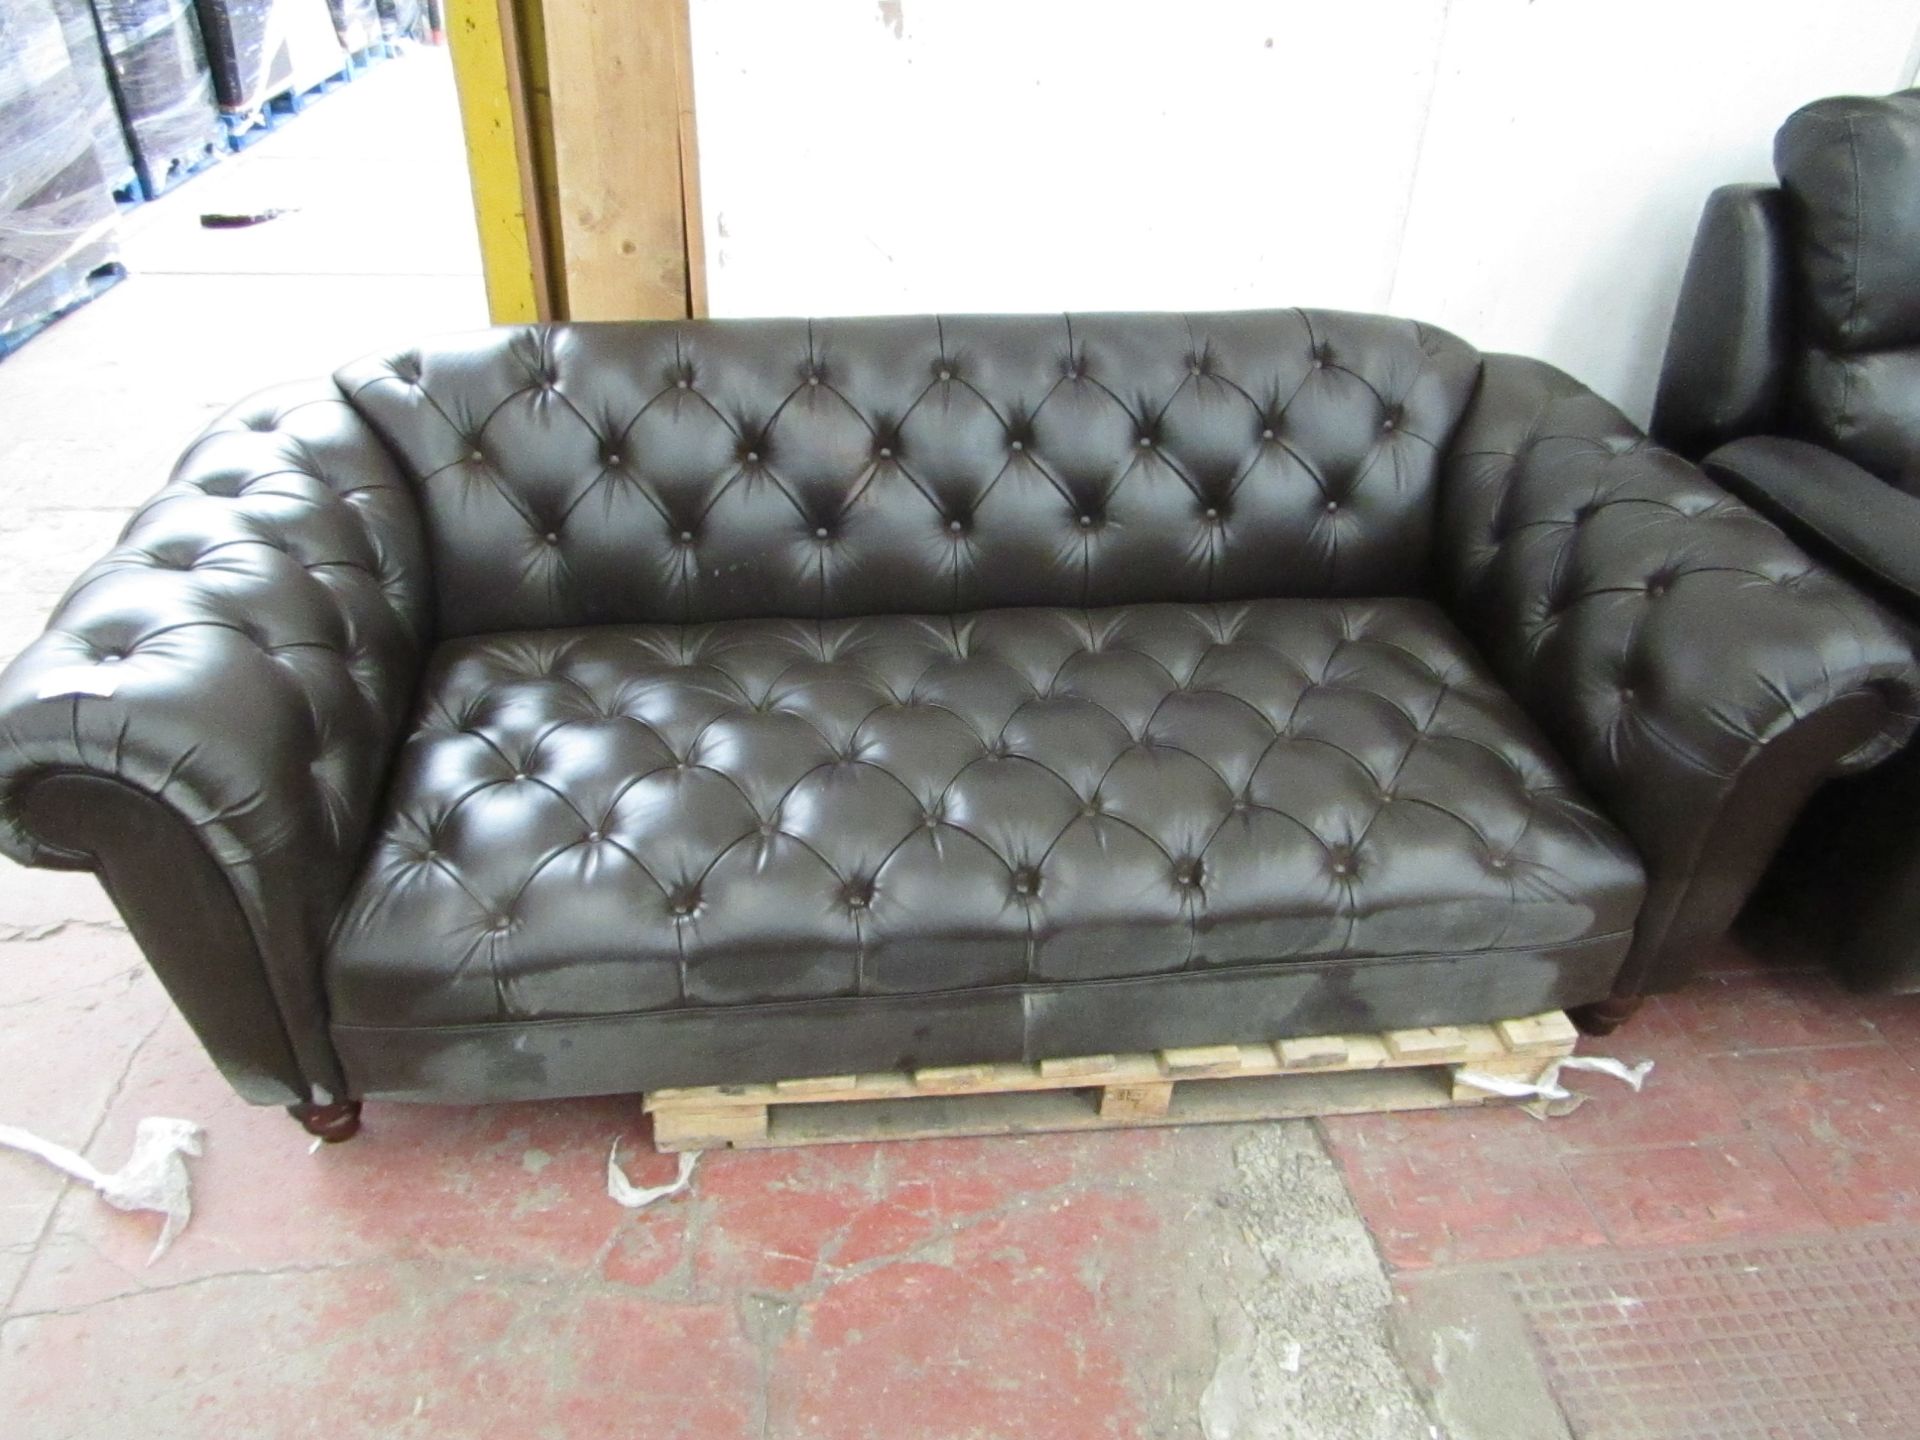 Chesterfield style 2 seater sofa, missing back leg